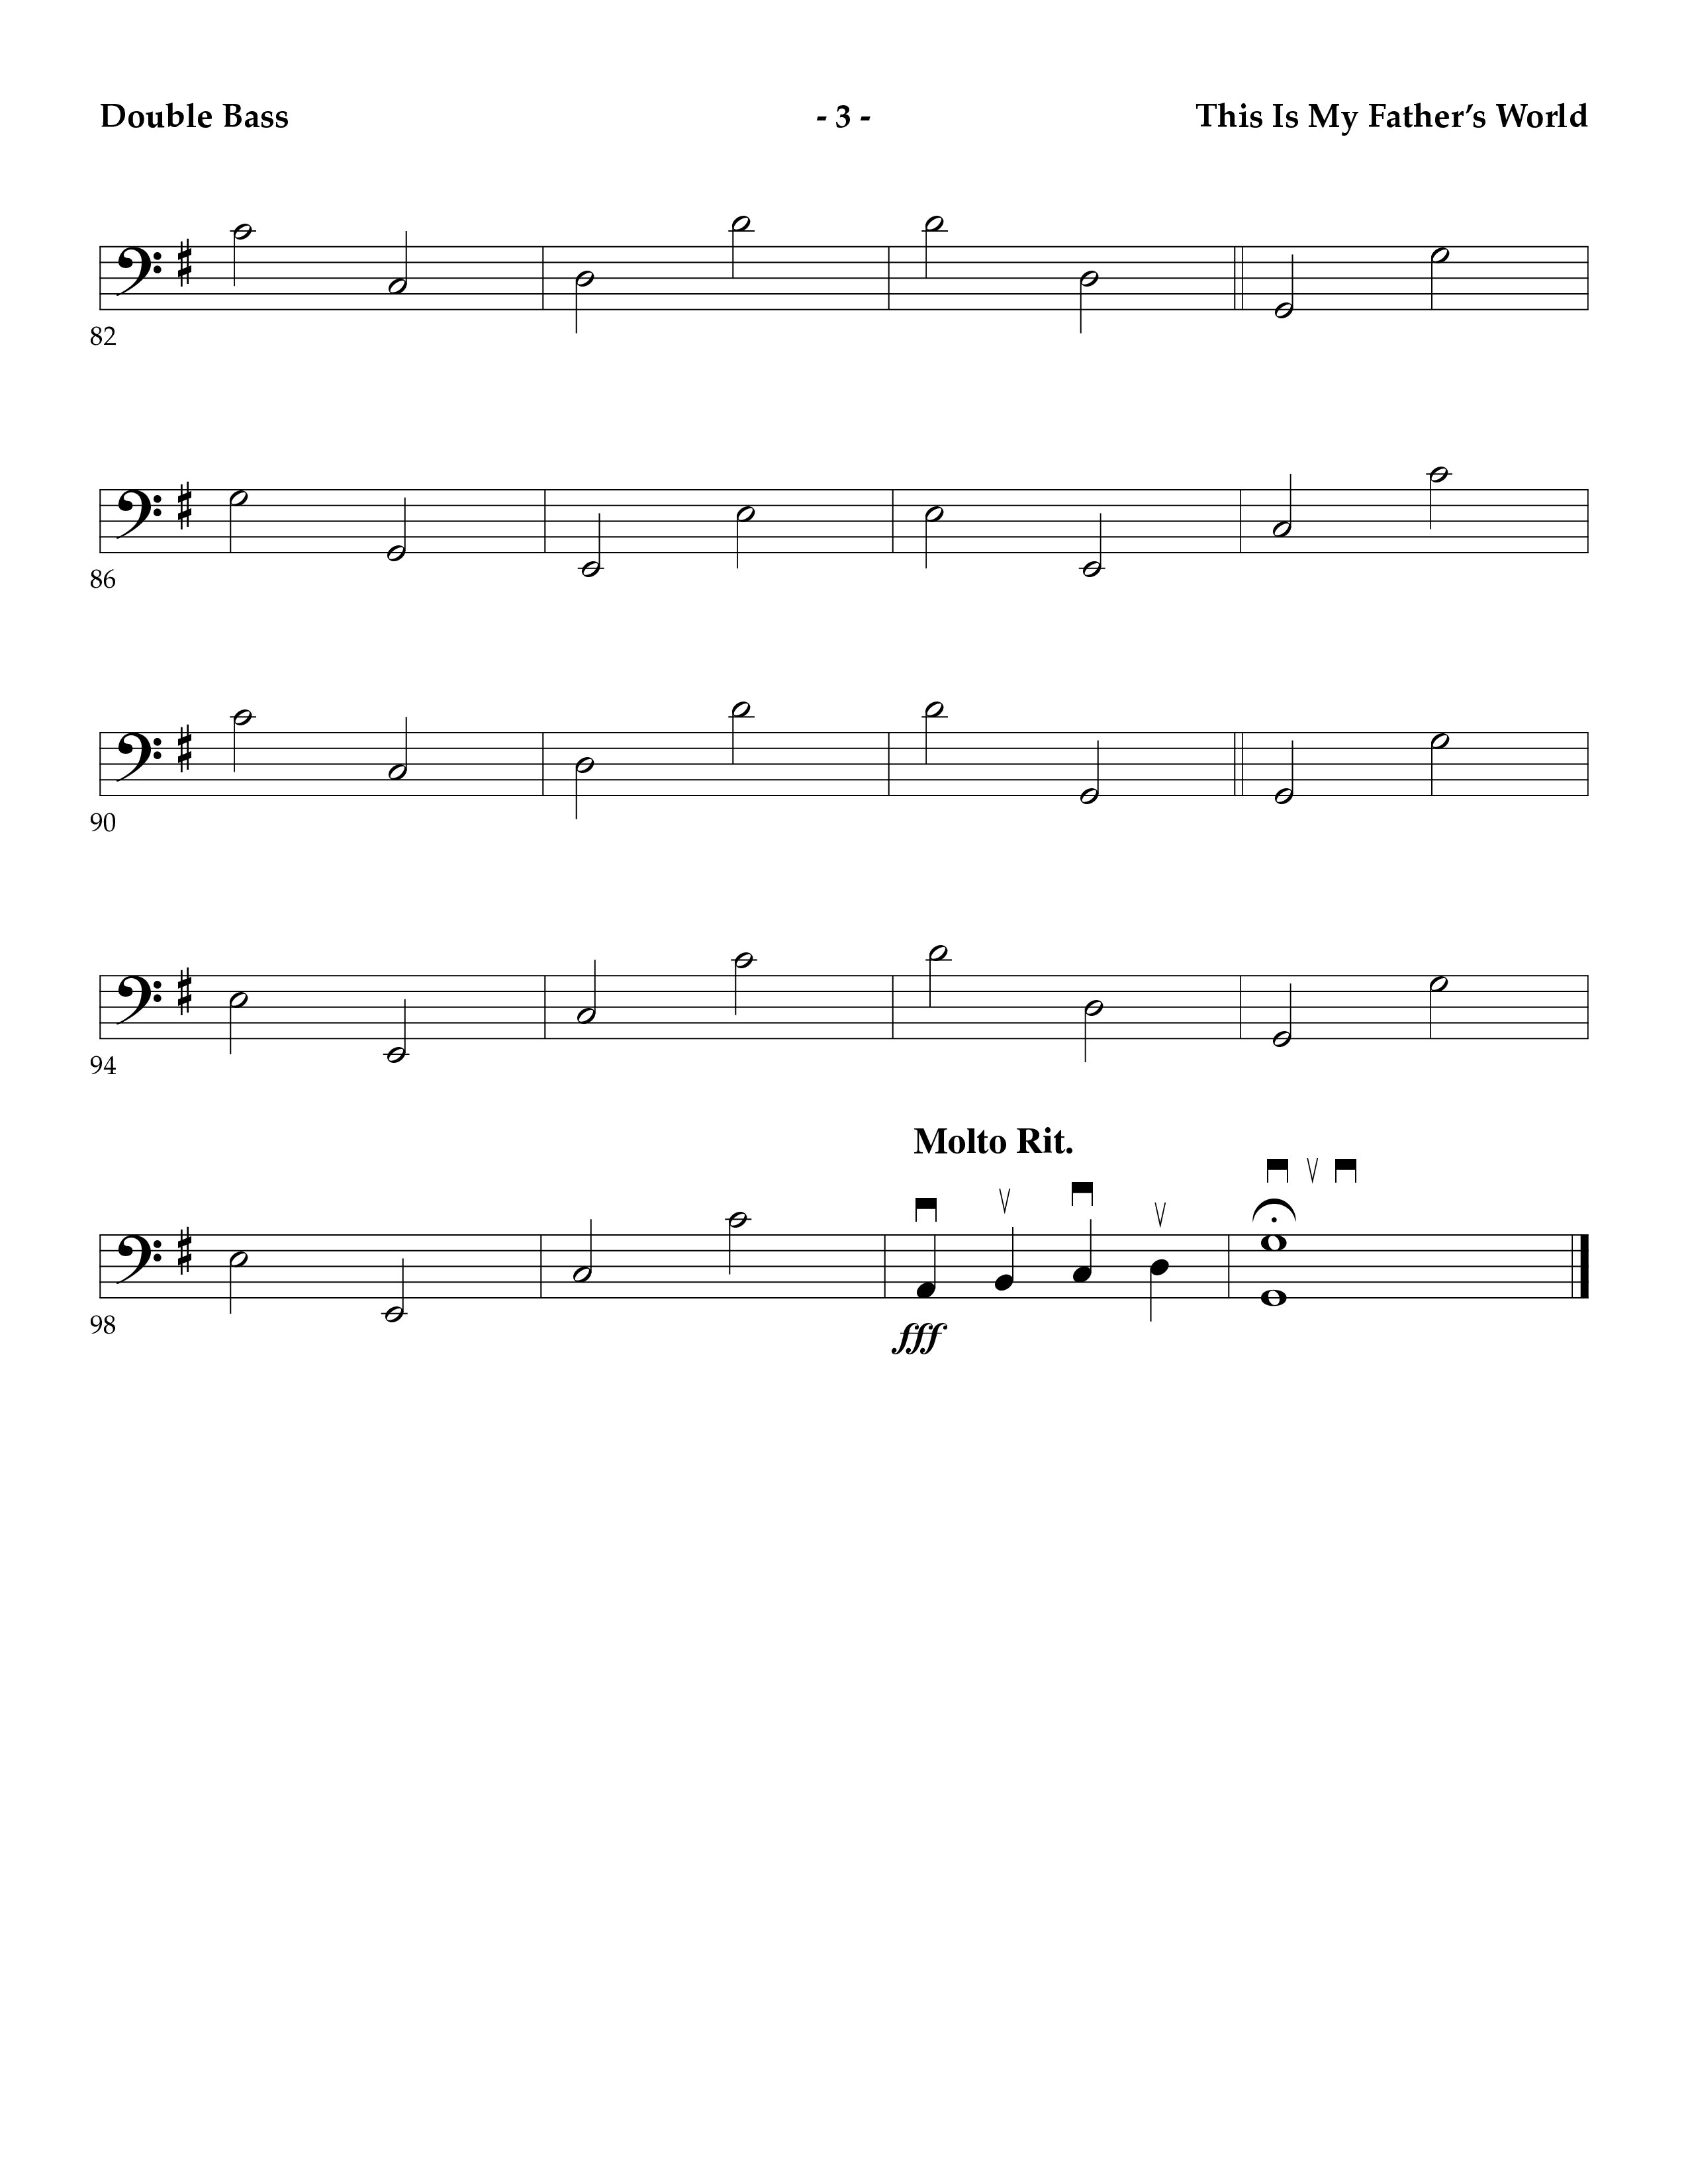 This Is My Father's World (Instrumental) Double Bass (Lifeway Worship / Arr. Mark Johnson)